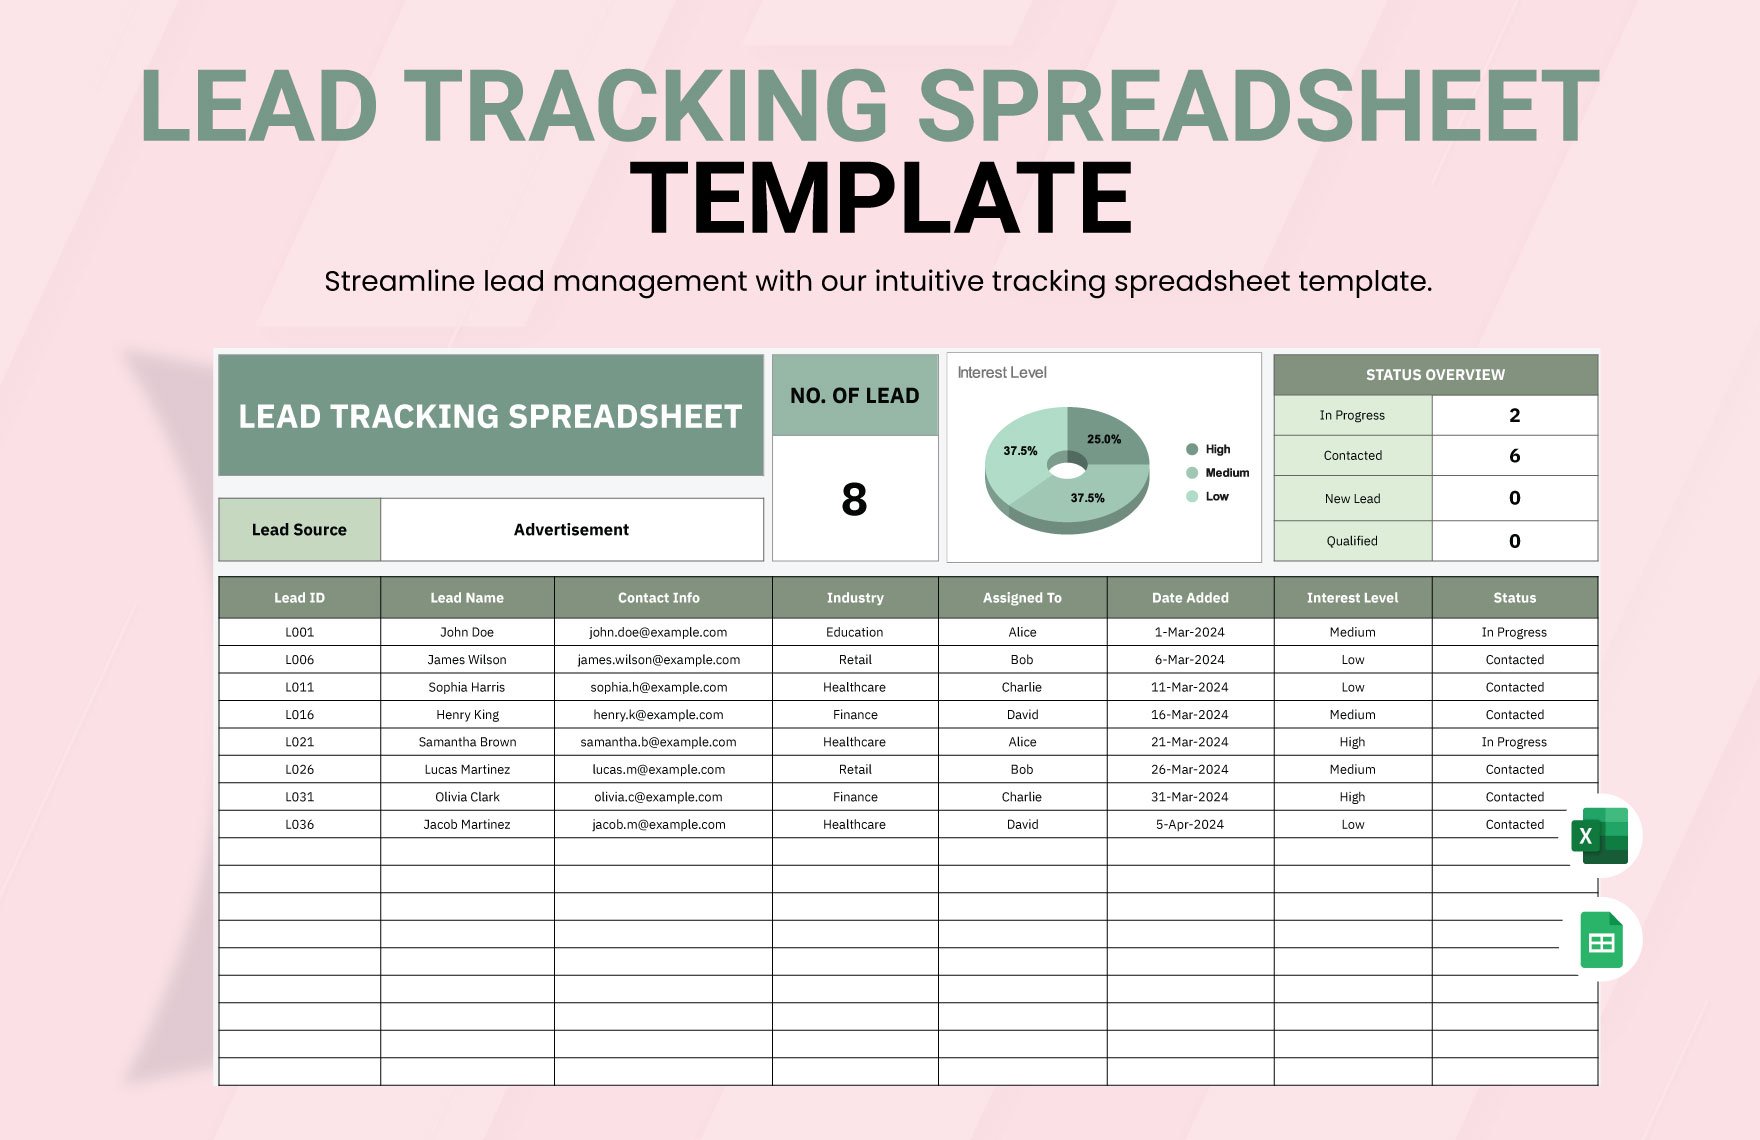 Lead Tracking Spreadsheet Template in Excel, Google Sheets